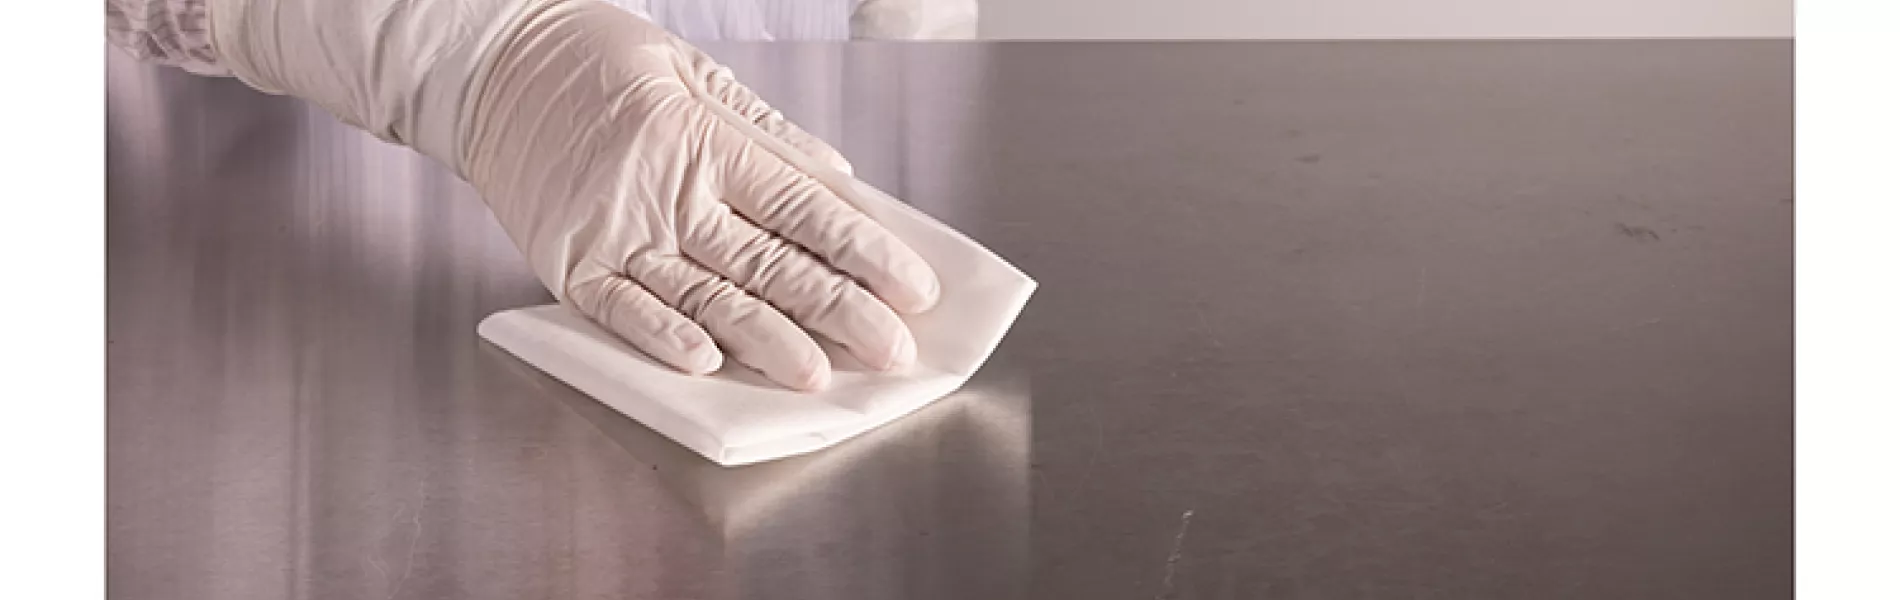 Proper Cleanroom Wiping Techniques